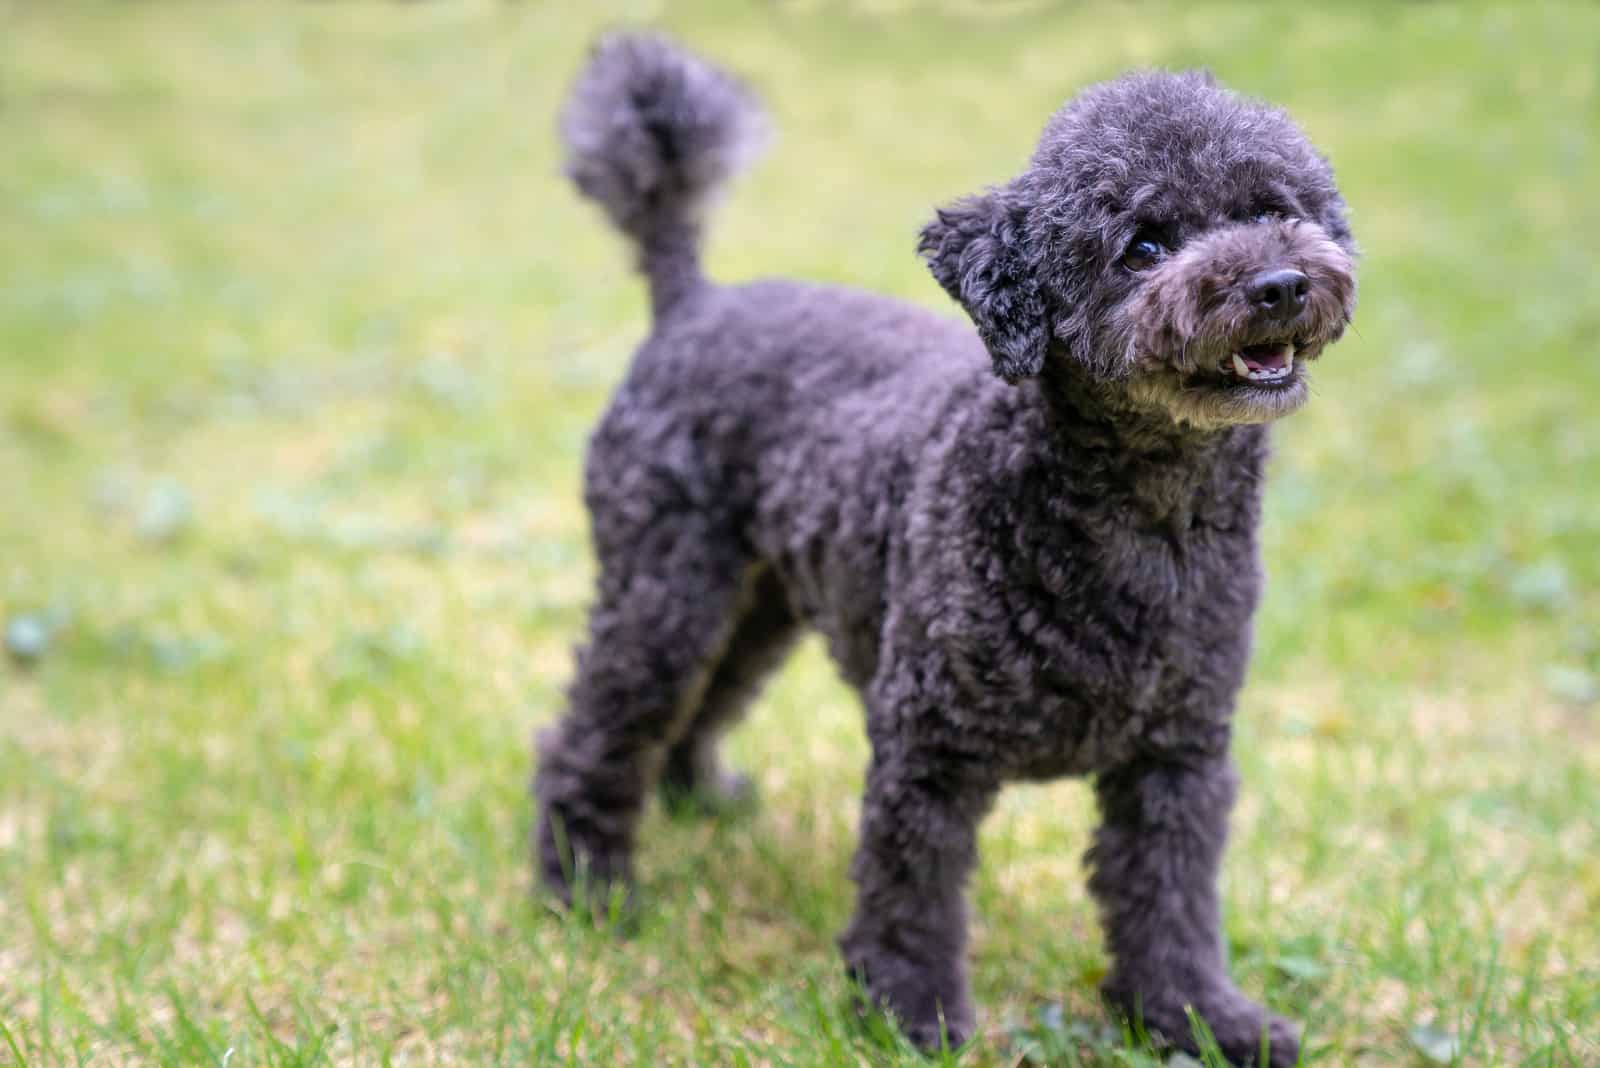 Black toy poodle standing on the grass in the garden